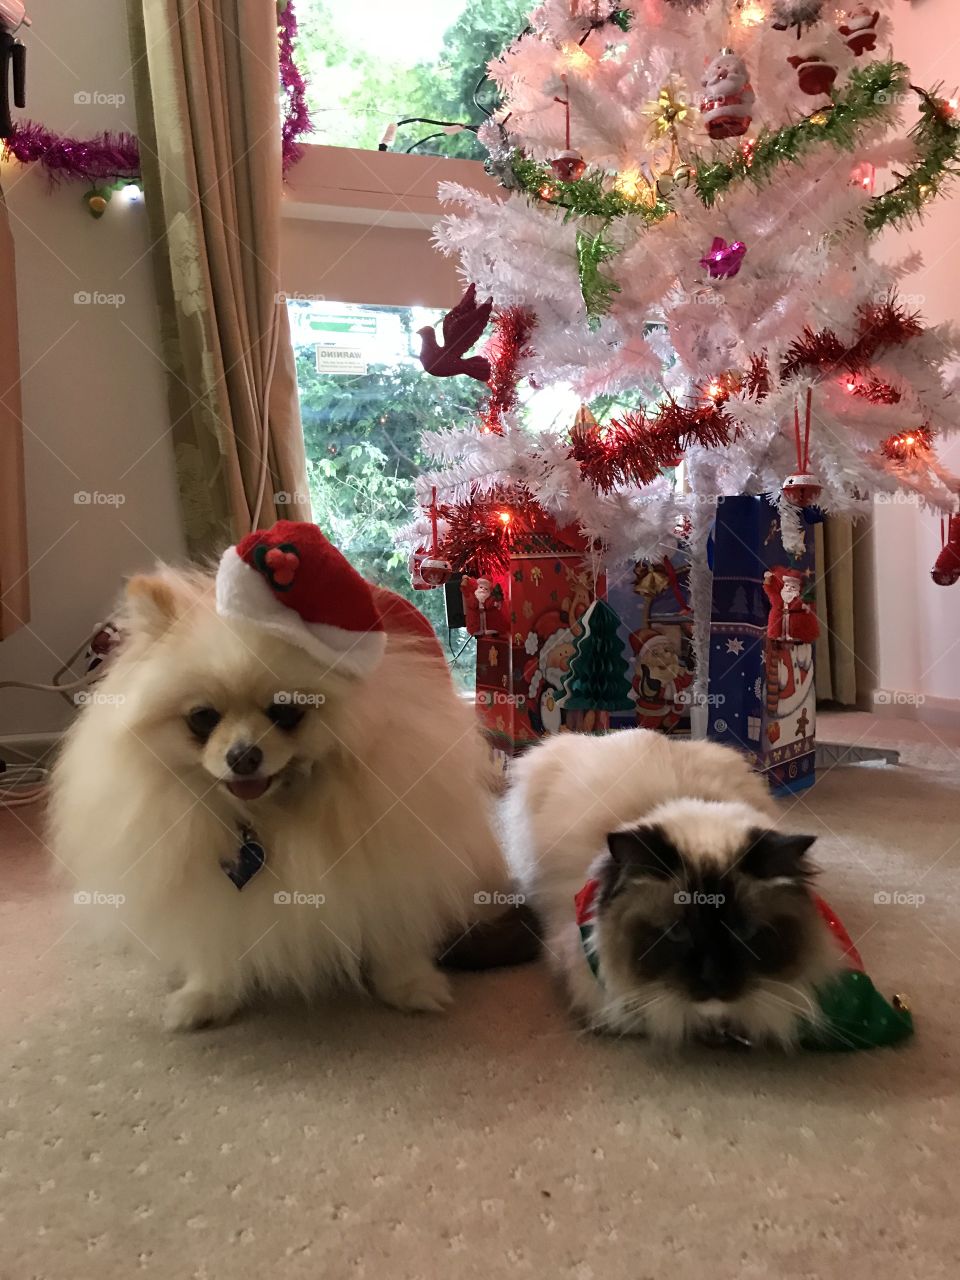 Lovely pets with Santa Clothes on nearby the Christmas tree in Cheltenham Melbourne Australia 